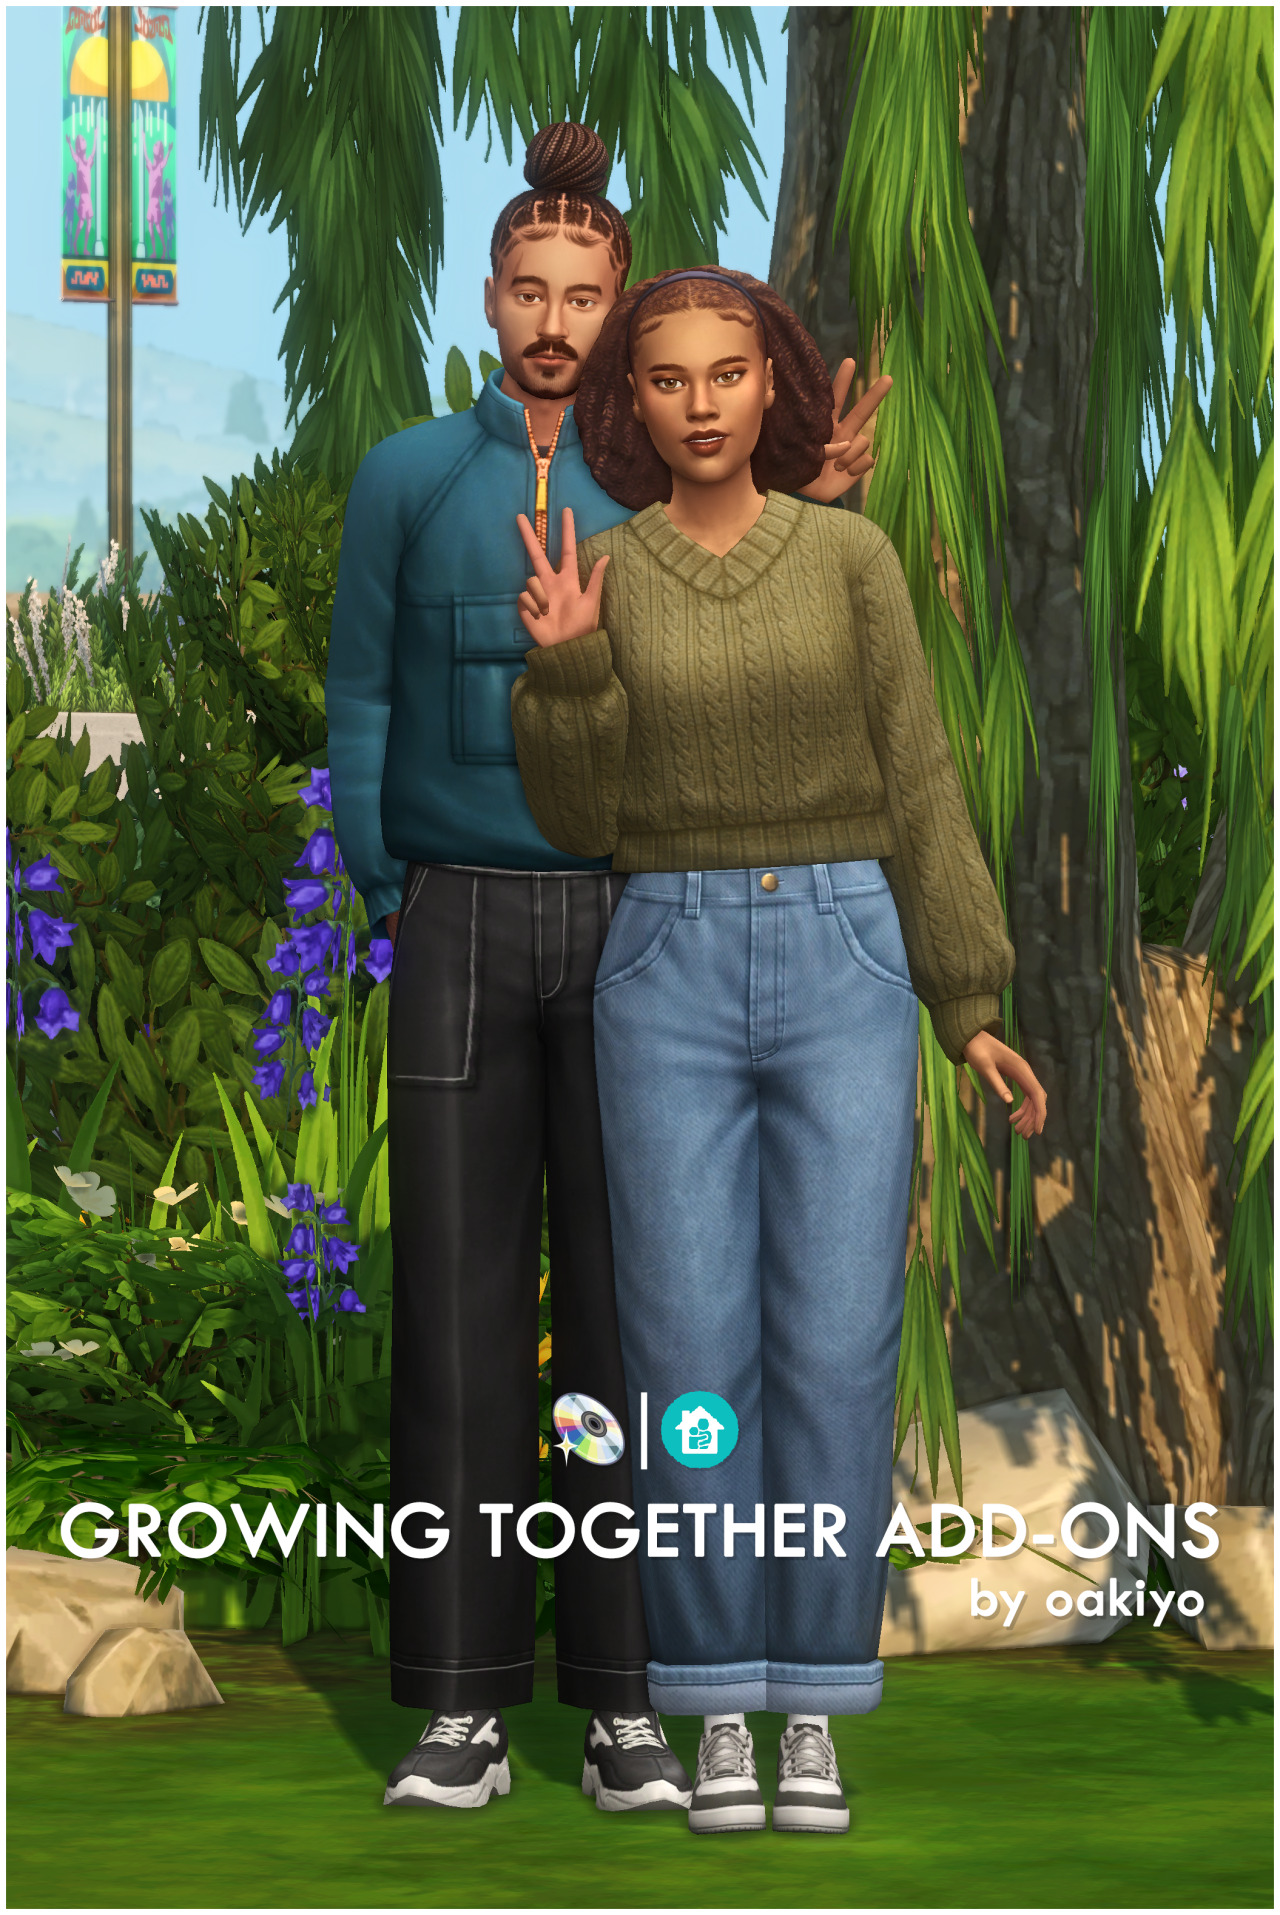 The Sims 4 Growing Together Expansion Pack: Official Reveal